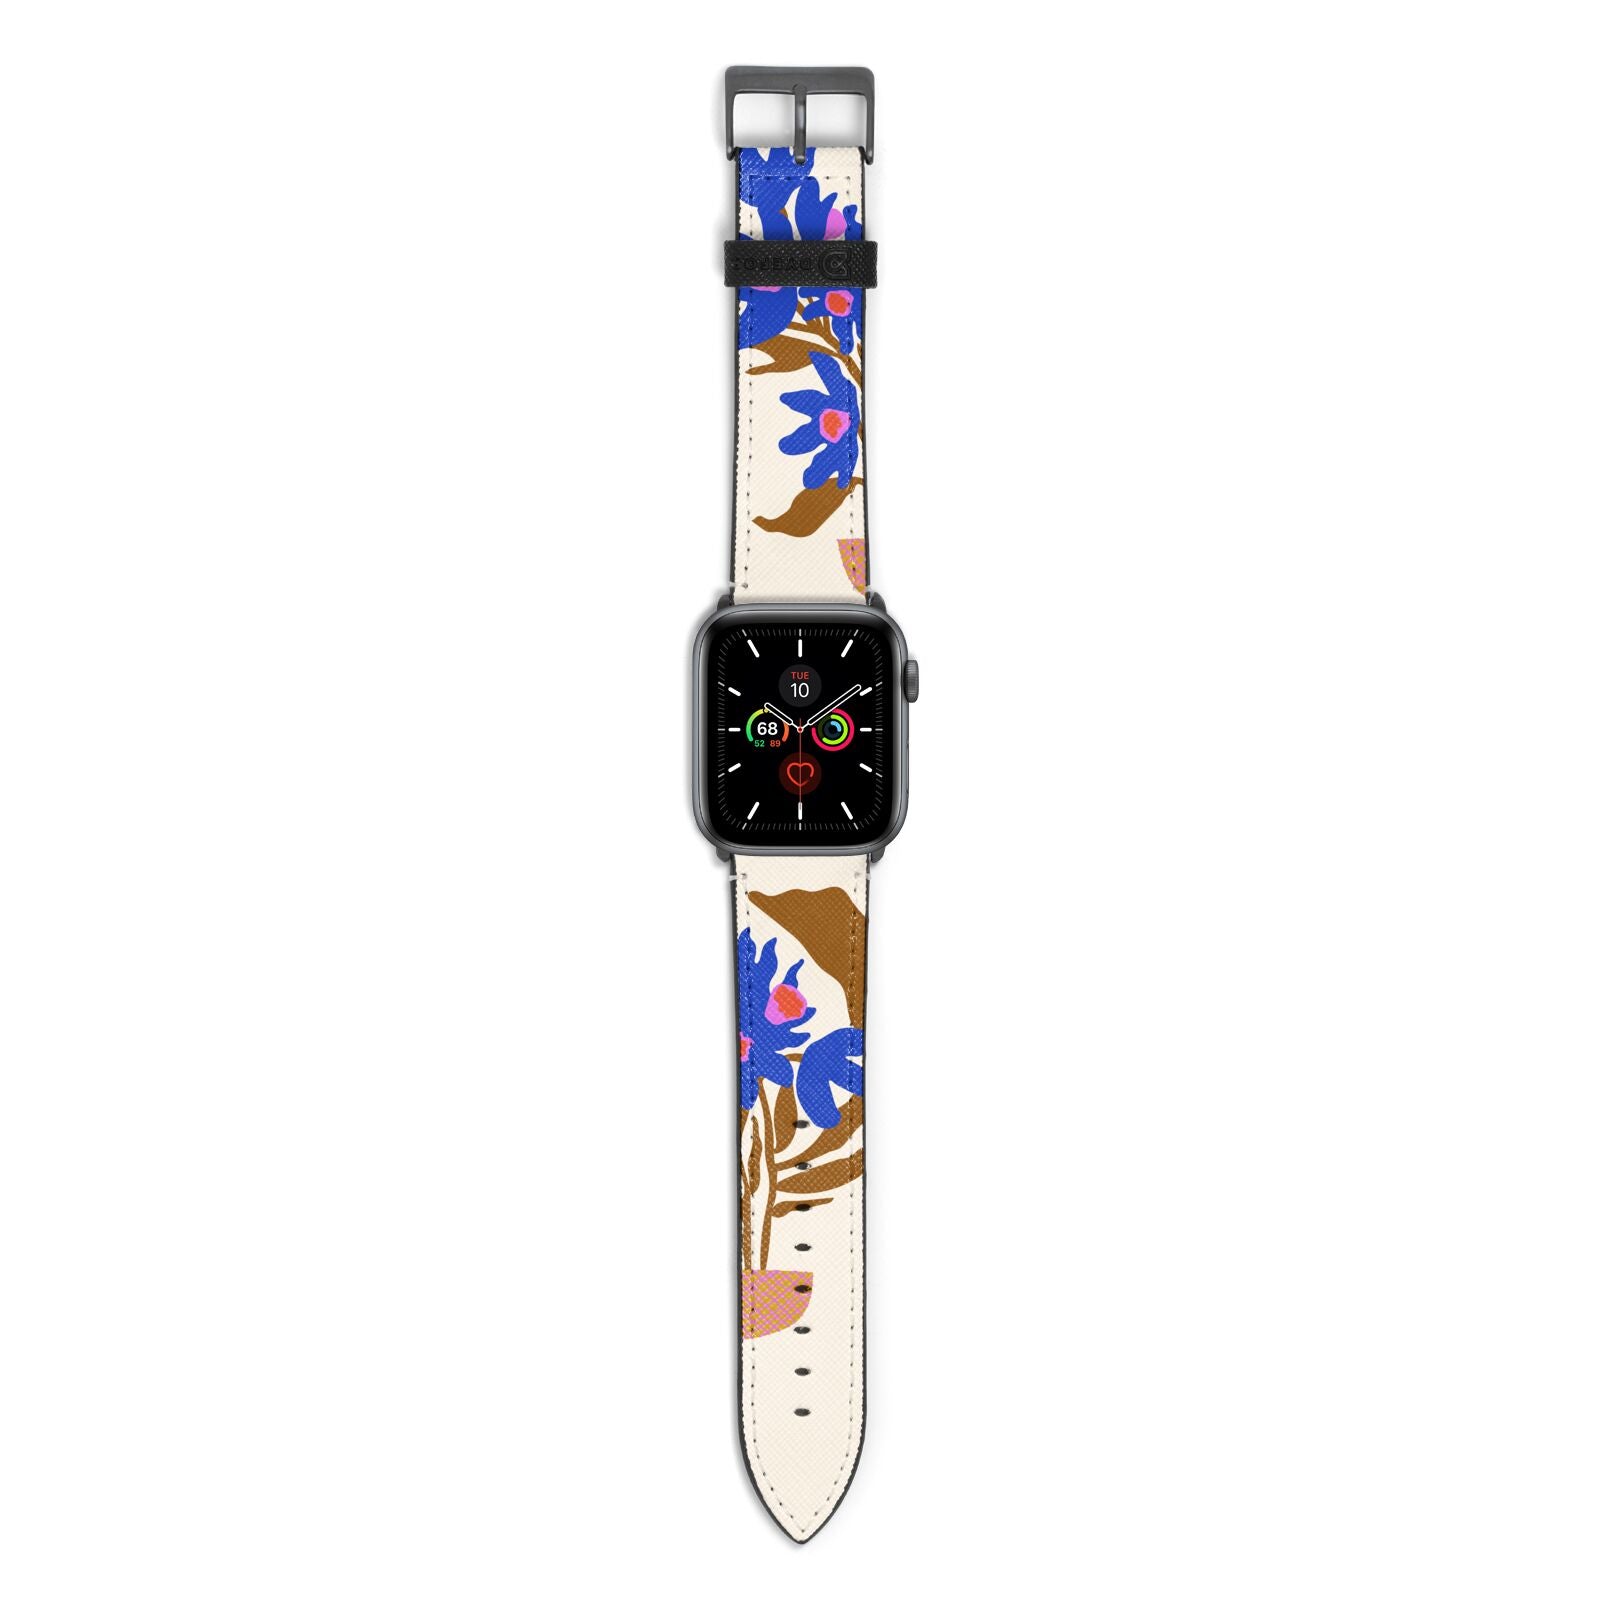 Flowers in a Vase Apple Watch Strap with Space Grey Hardware